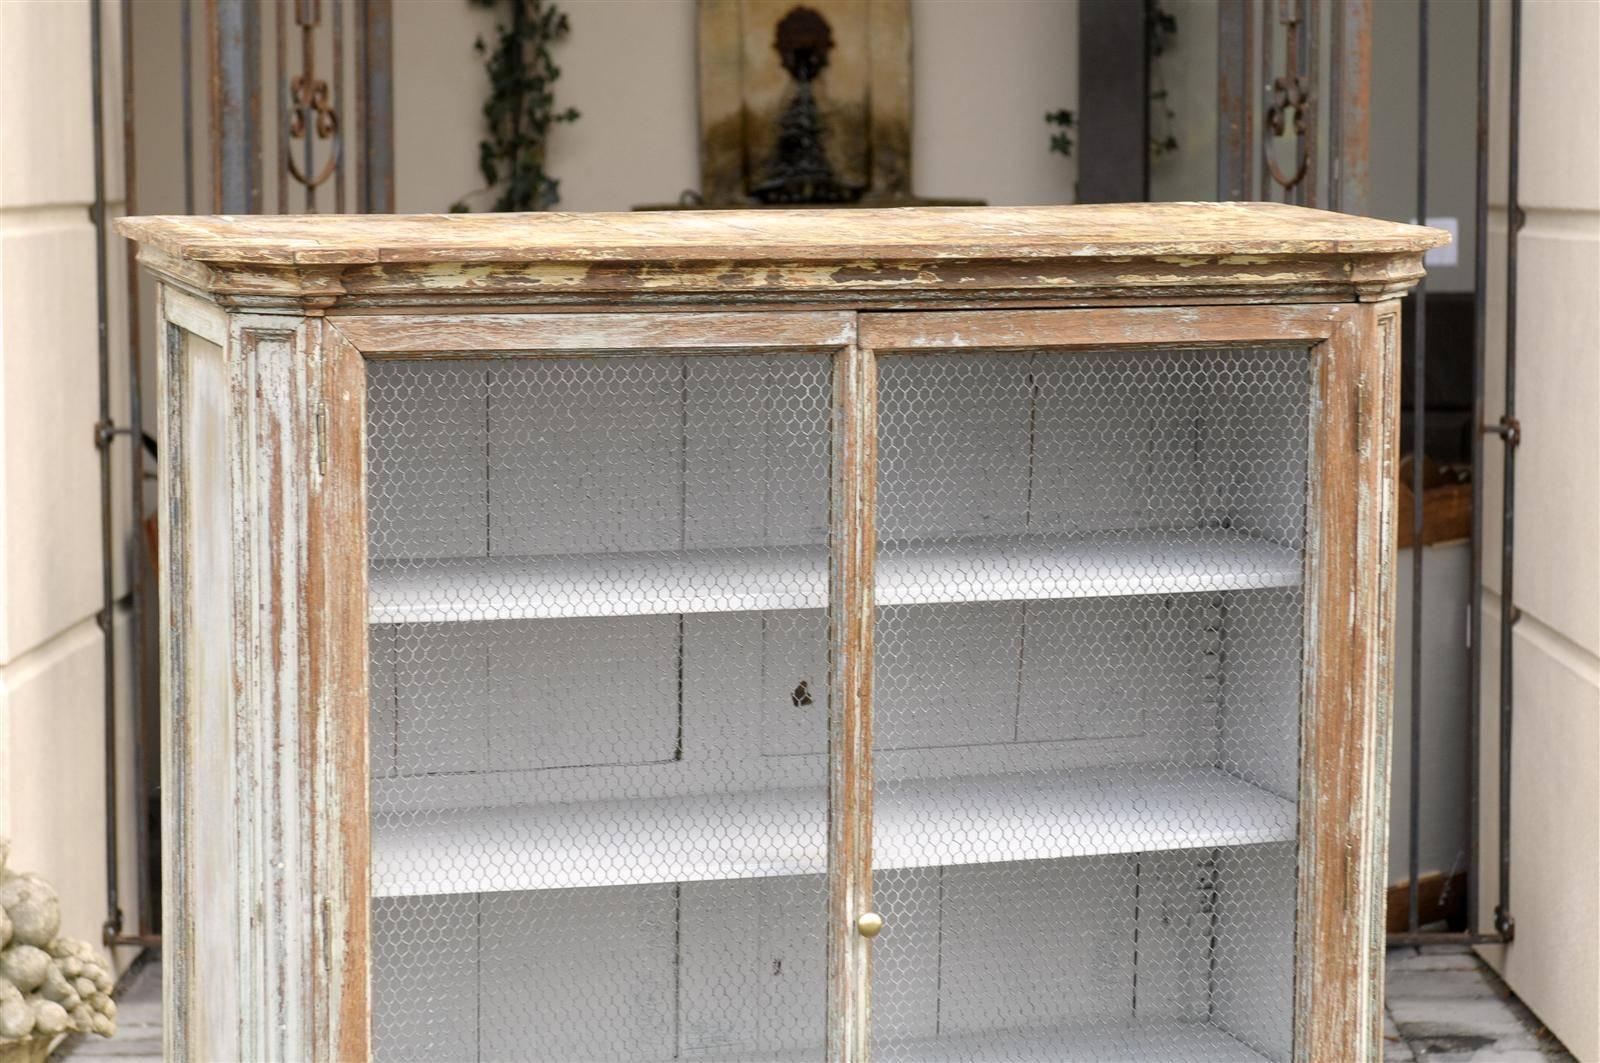 French Mid-19th Century Painted Cabinet with Chicken Wire Doors In Good Condition For Sale In Atlanta, GA